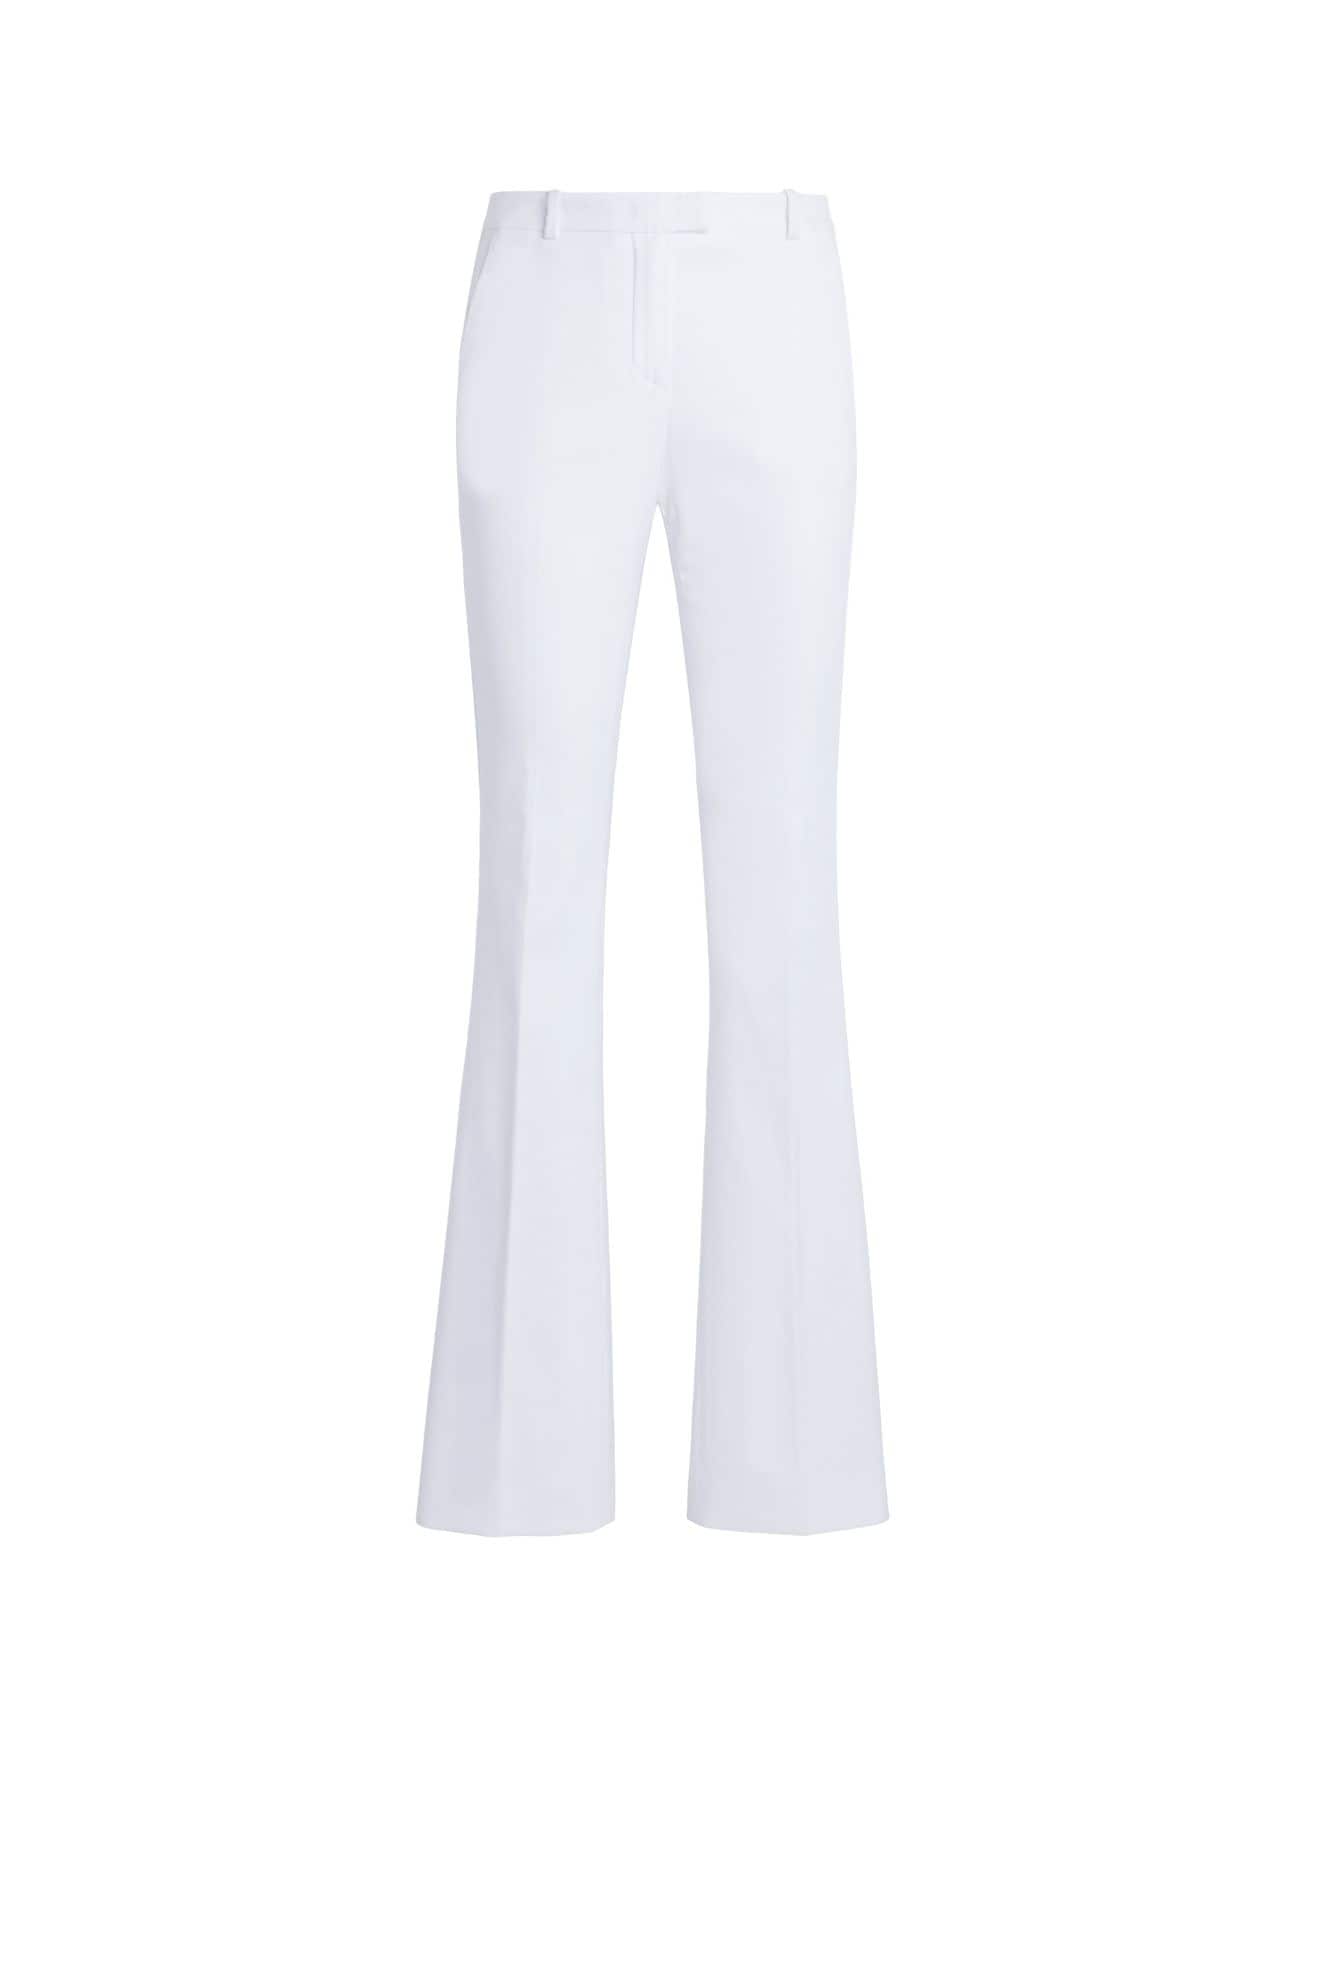 Forever New Trousers and Pants  Buy Forever New Selena Pintuck Flare Pant  Online  Nykaa Fashion